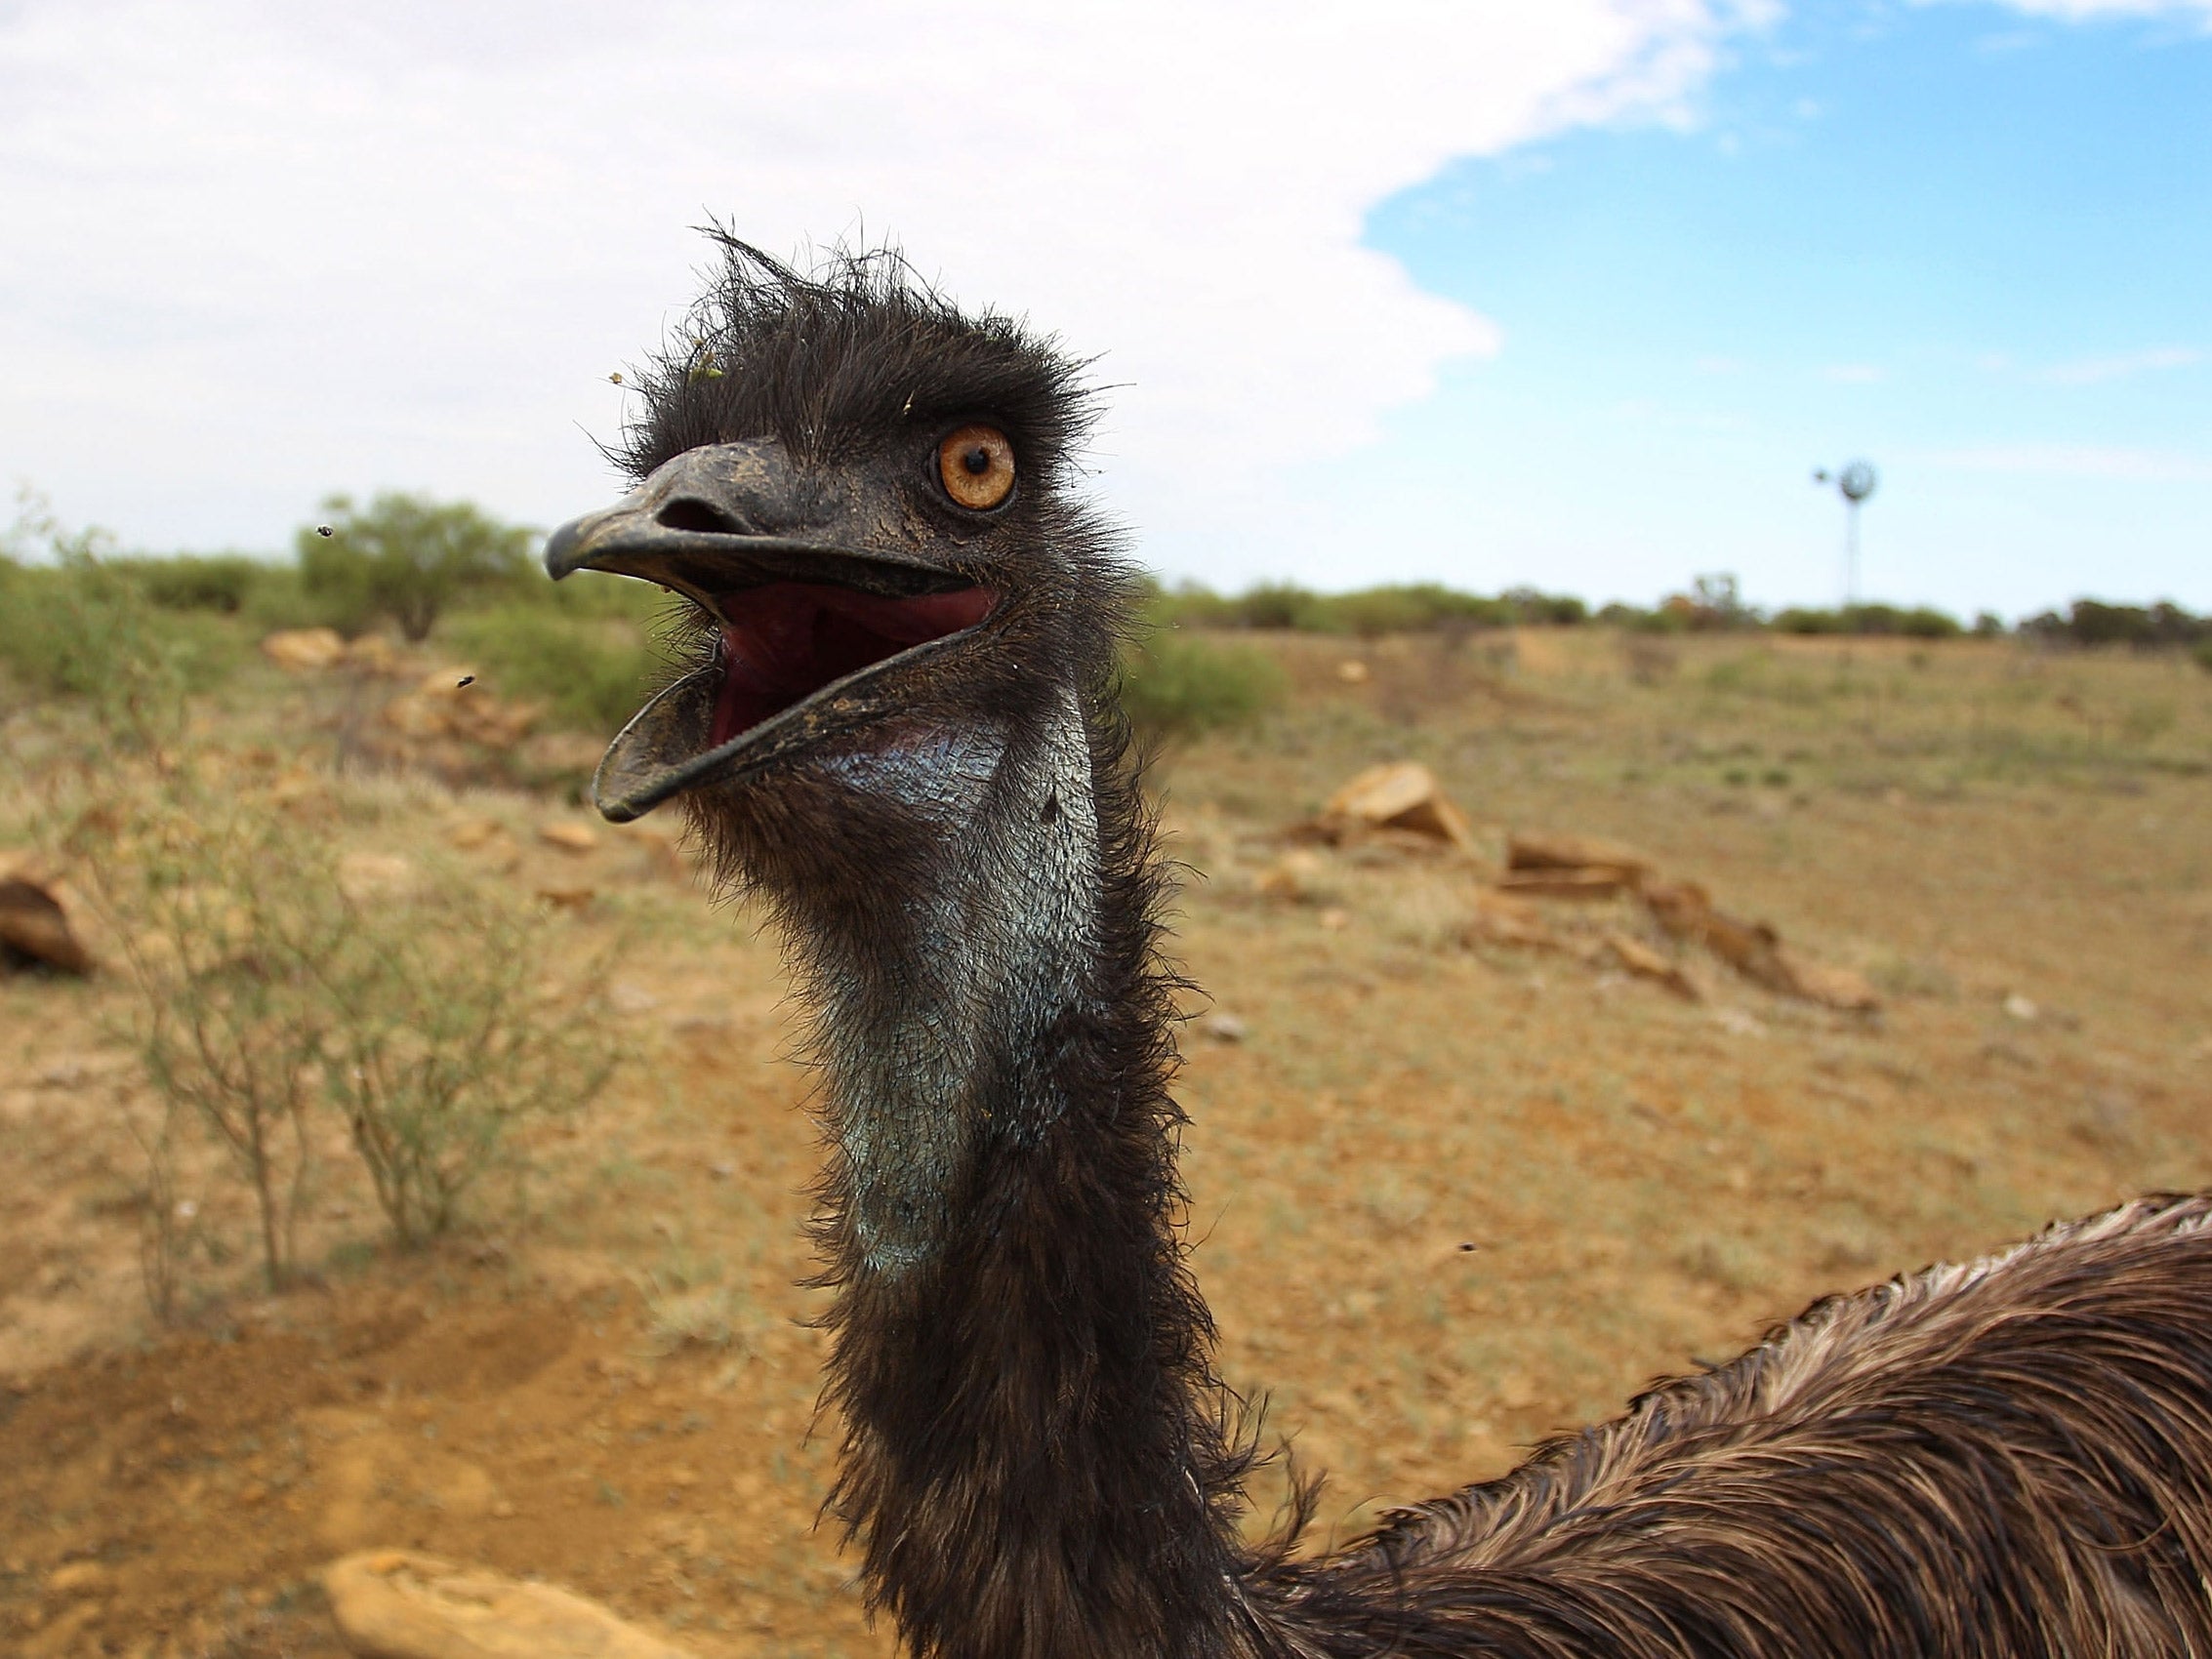 Emus can grow up to 1.9 metres in height, making it the world's second tallest bird after the ostrich